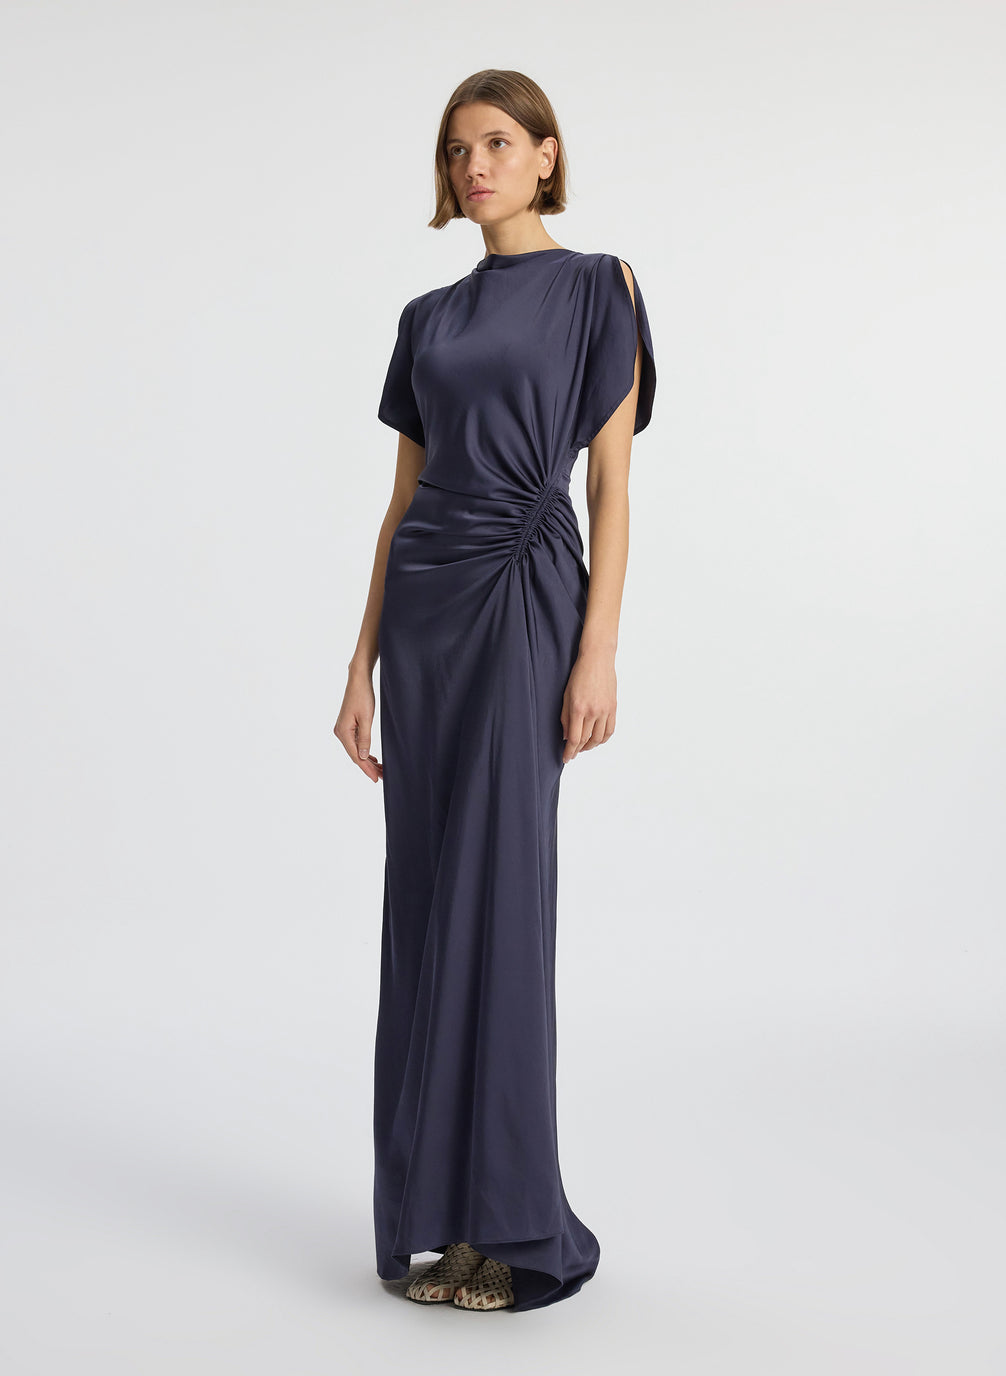 side view of woman wearing navy blue short sleeve satin gown